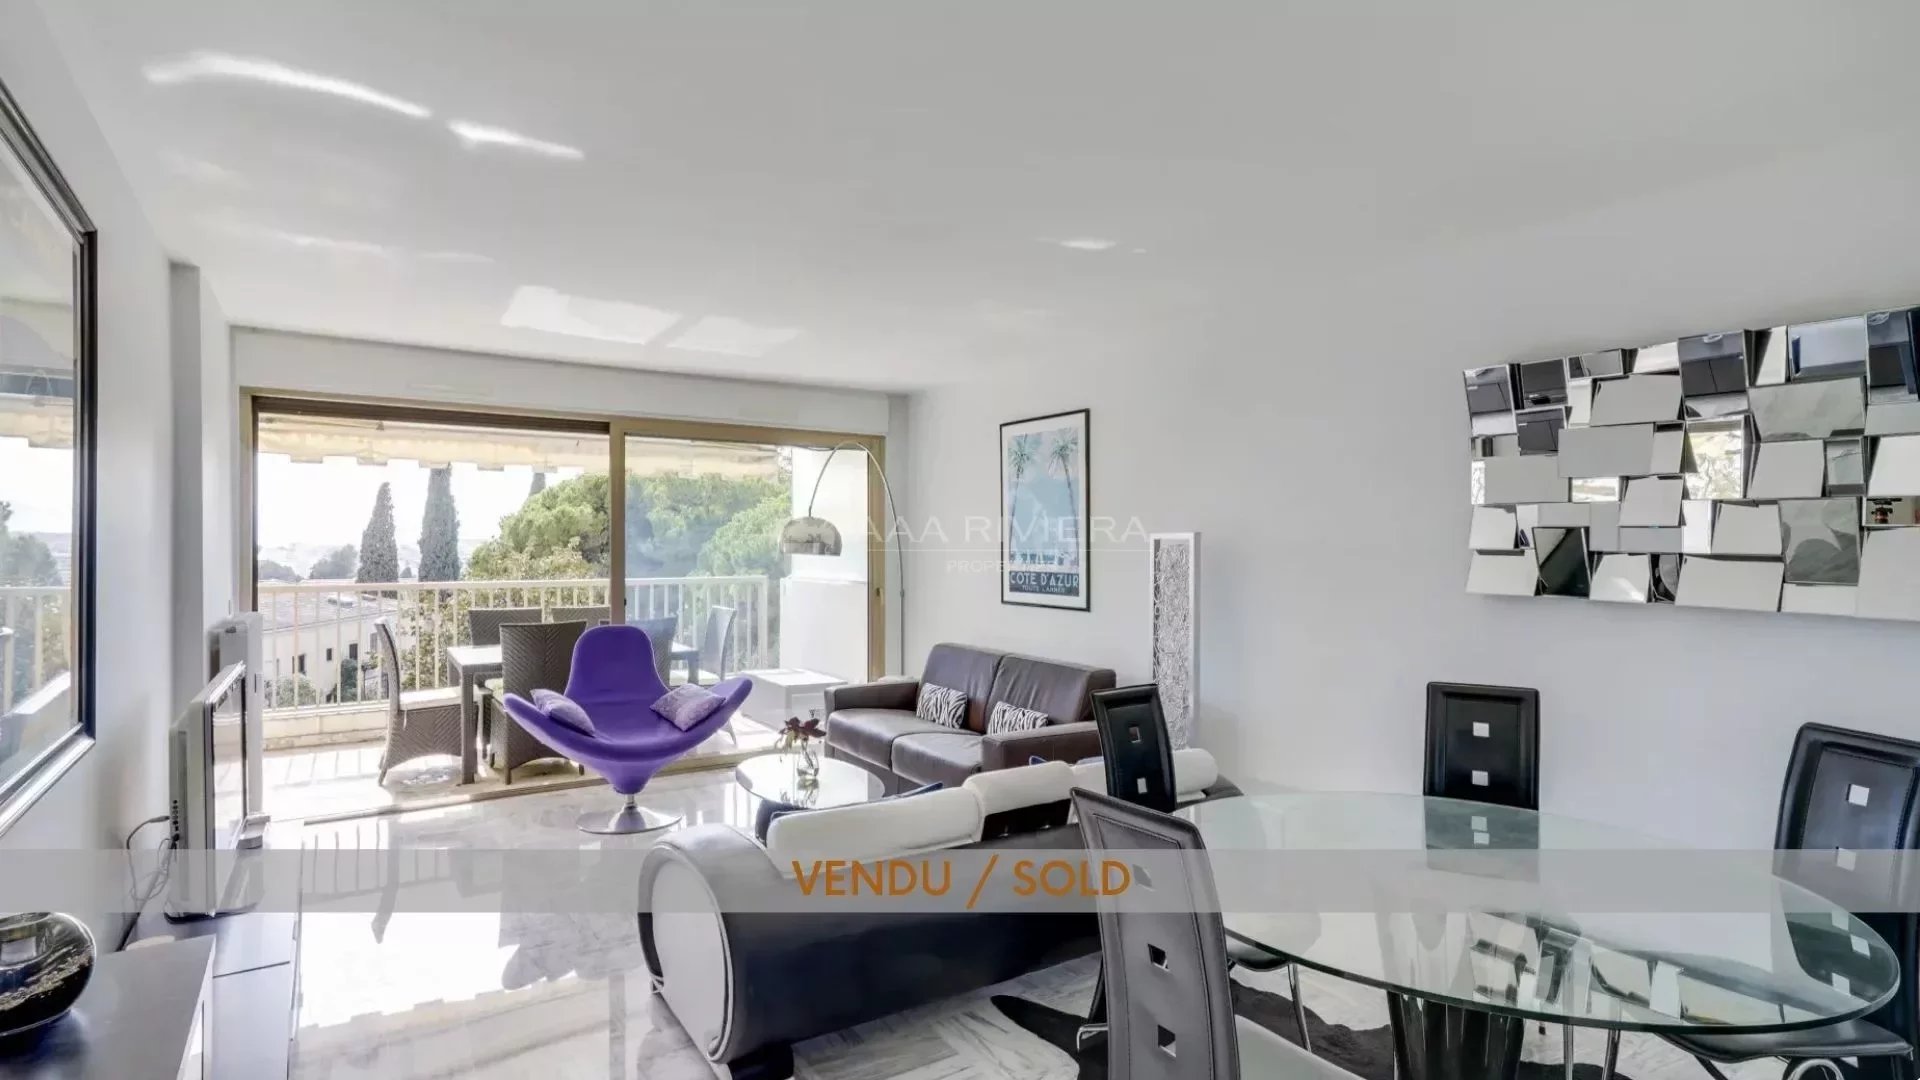 SOLD - CANNES - OXFORD - Nice 3 room apartment with a big terrace and a wonderful view of the green garden in a quiet residence with caretaker, pool and tennis